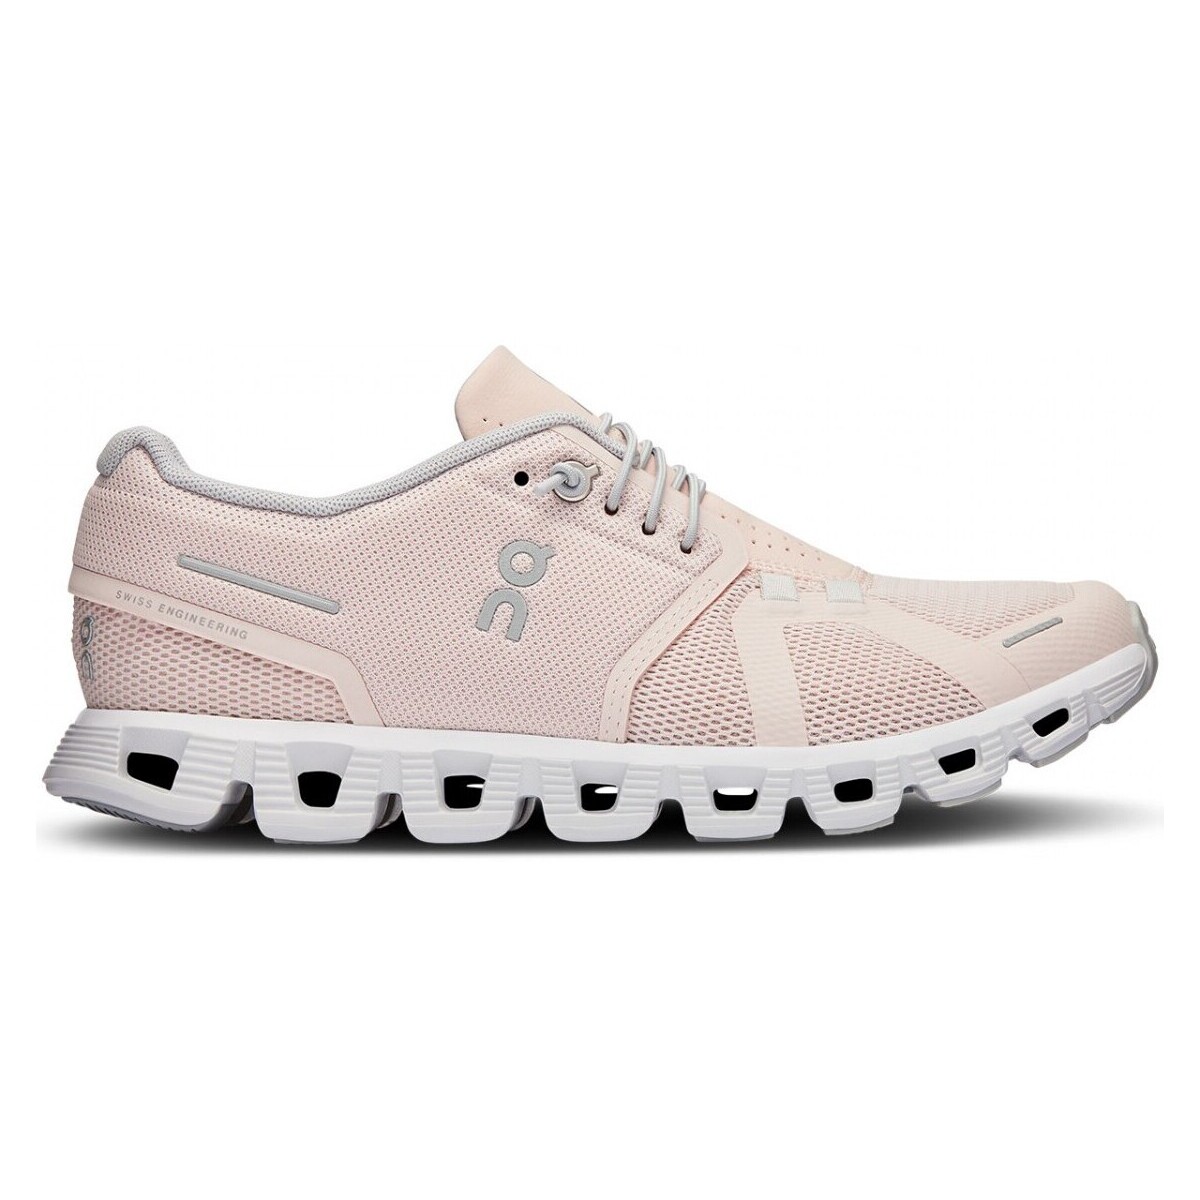 Scarpe Donna Sneakers On Sneaker Cloud 5 Shell White Rosa